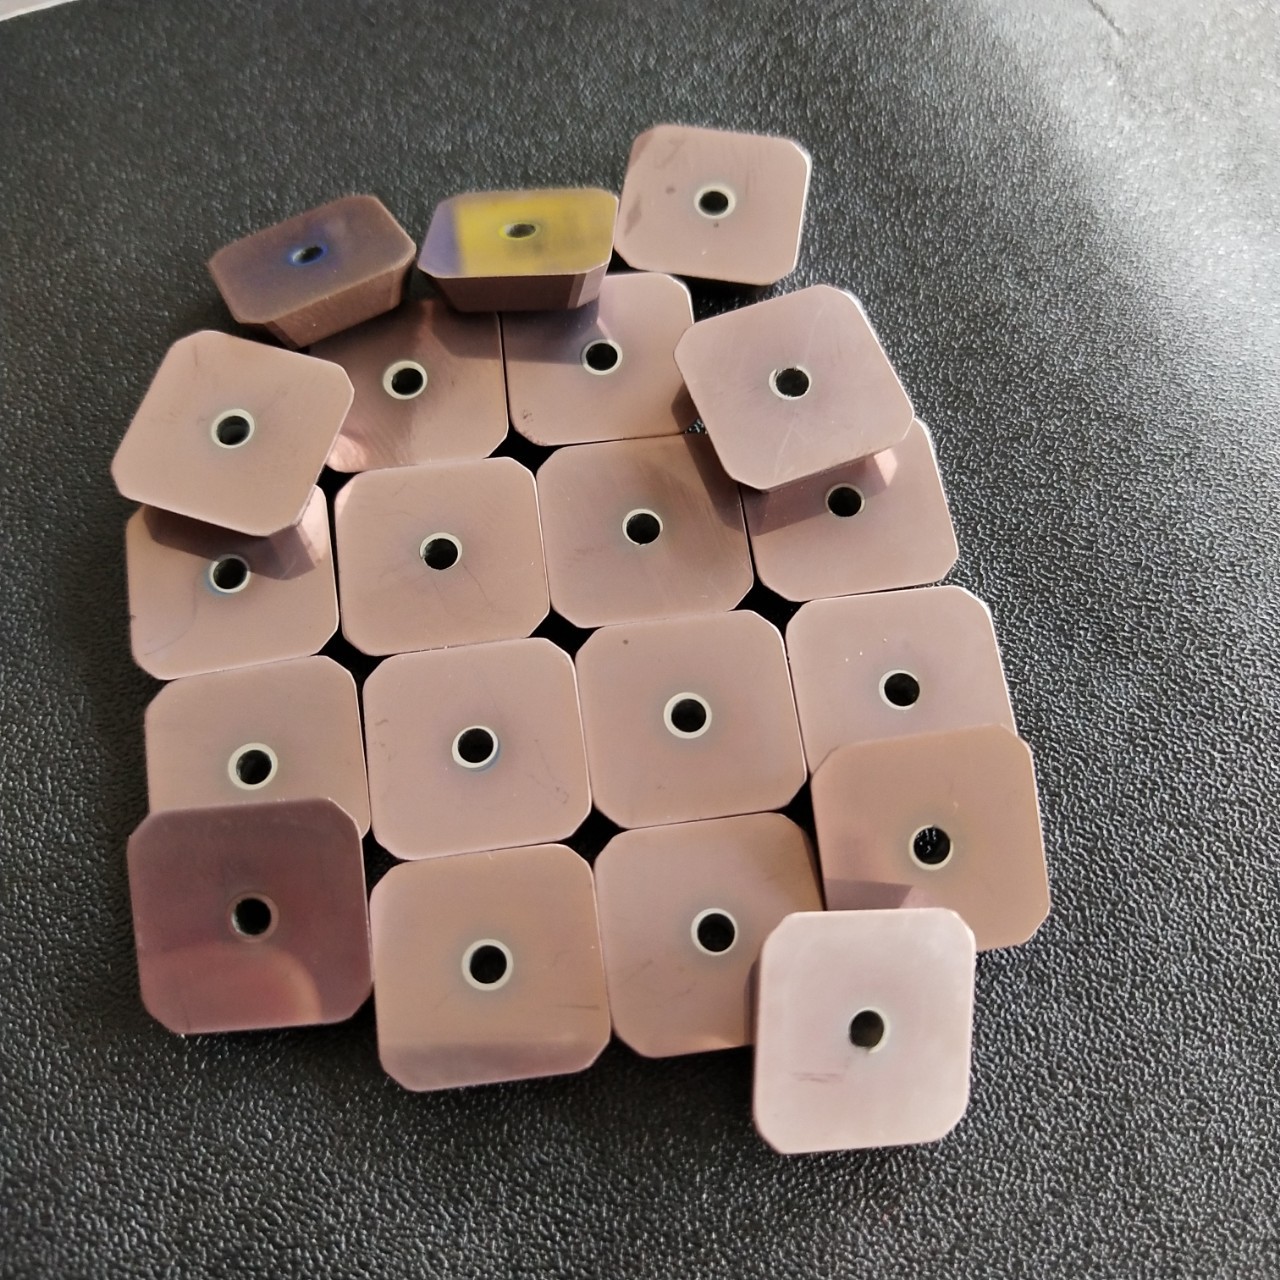 sekn1203 Milling Inserts Coating Milling Inserts Square Milling Inserts